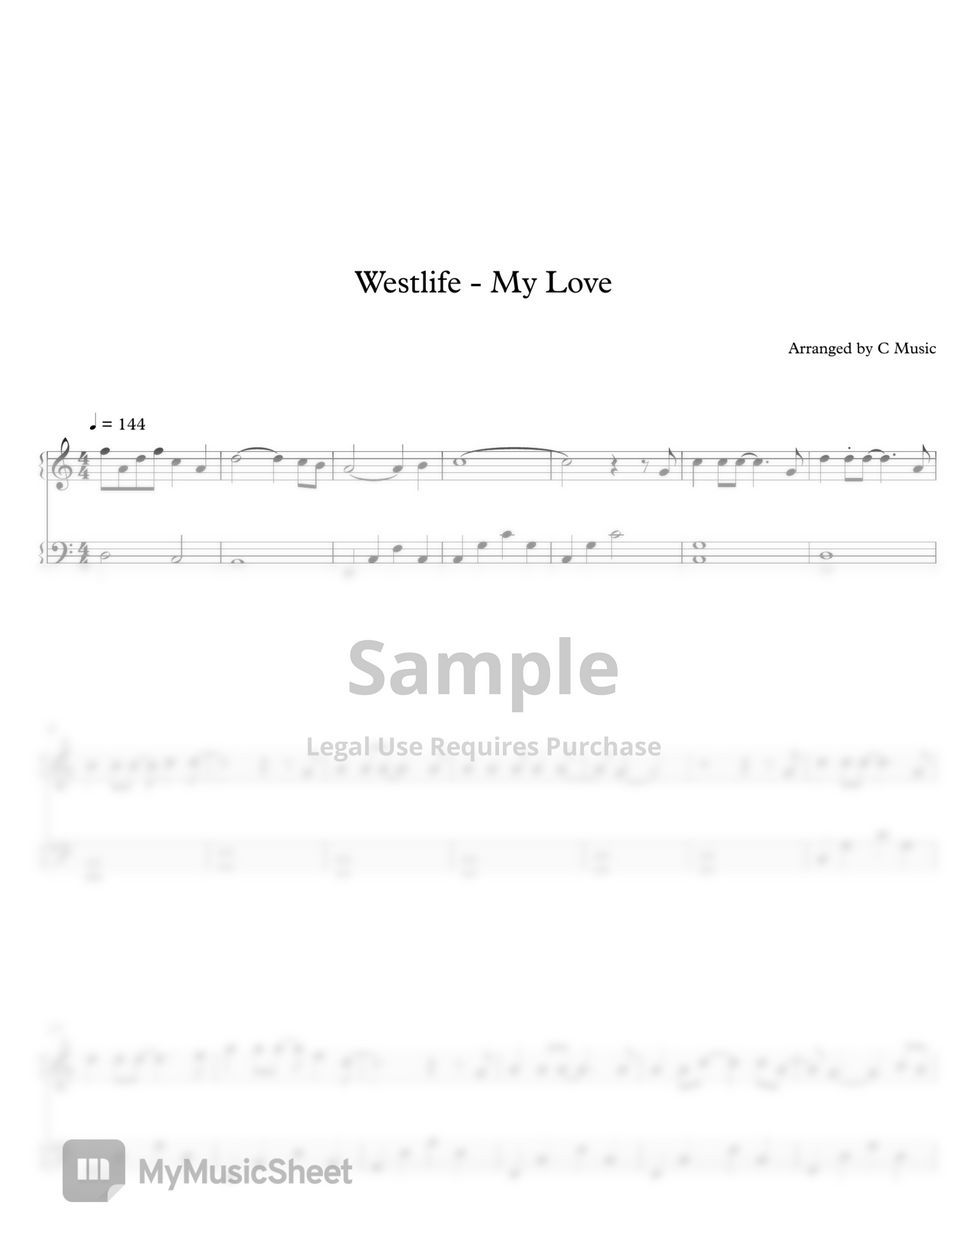 Westlife - My Love by C Music